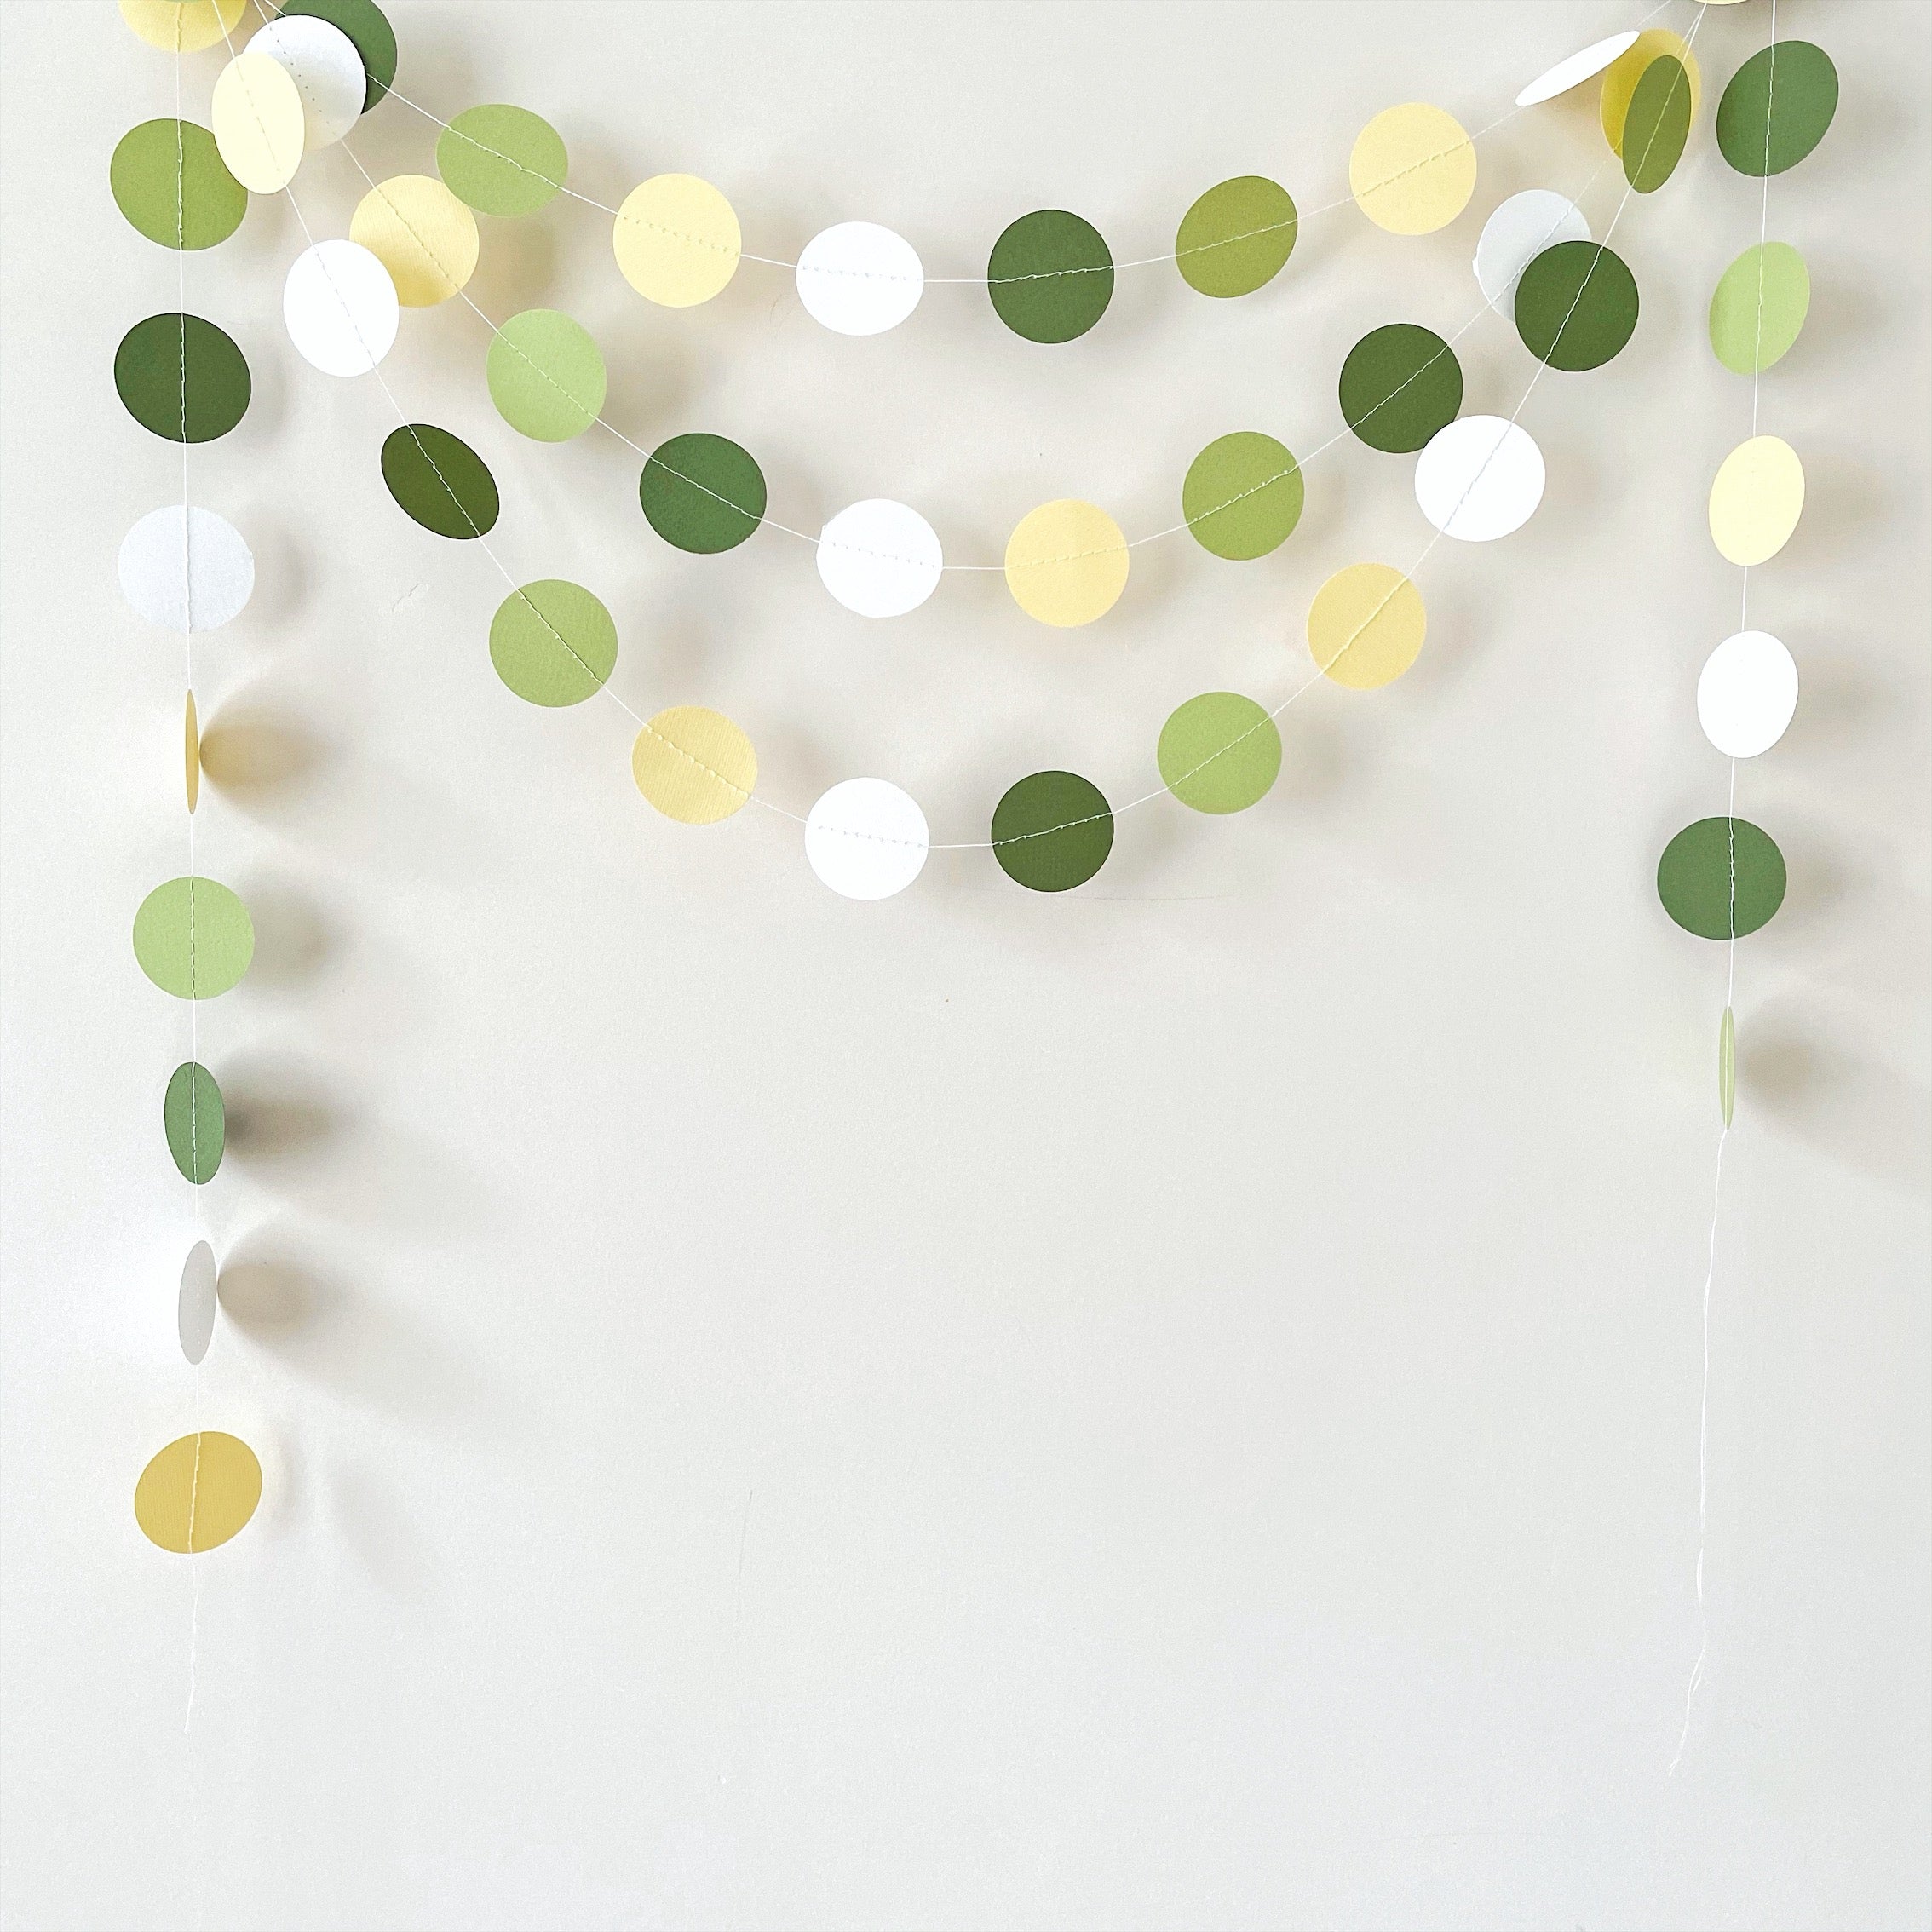 Sweet Pea Birthday Garland Pea First Birthday Decorations Little Sweet Pea in a Pod Birthday Sweet Pea 1st Birthday Twins Two Peas in a Pod 